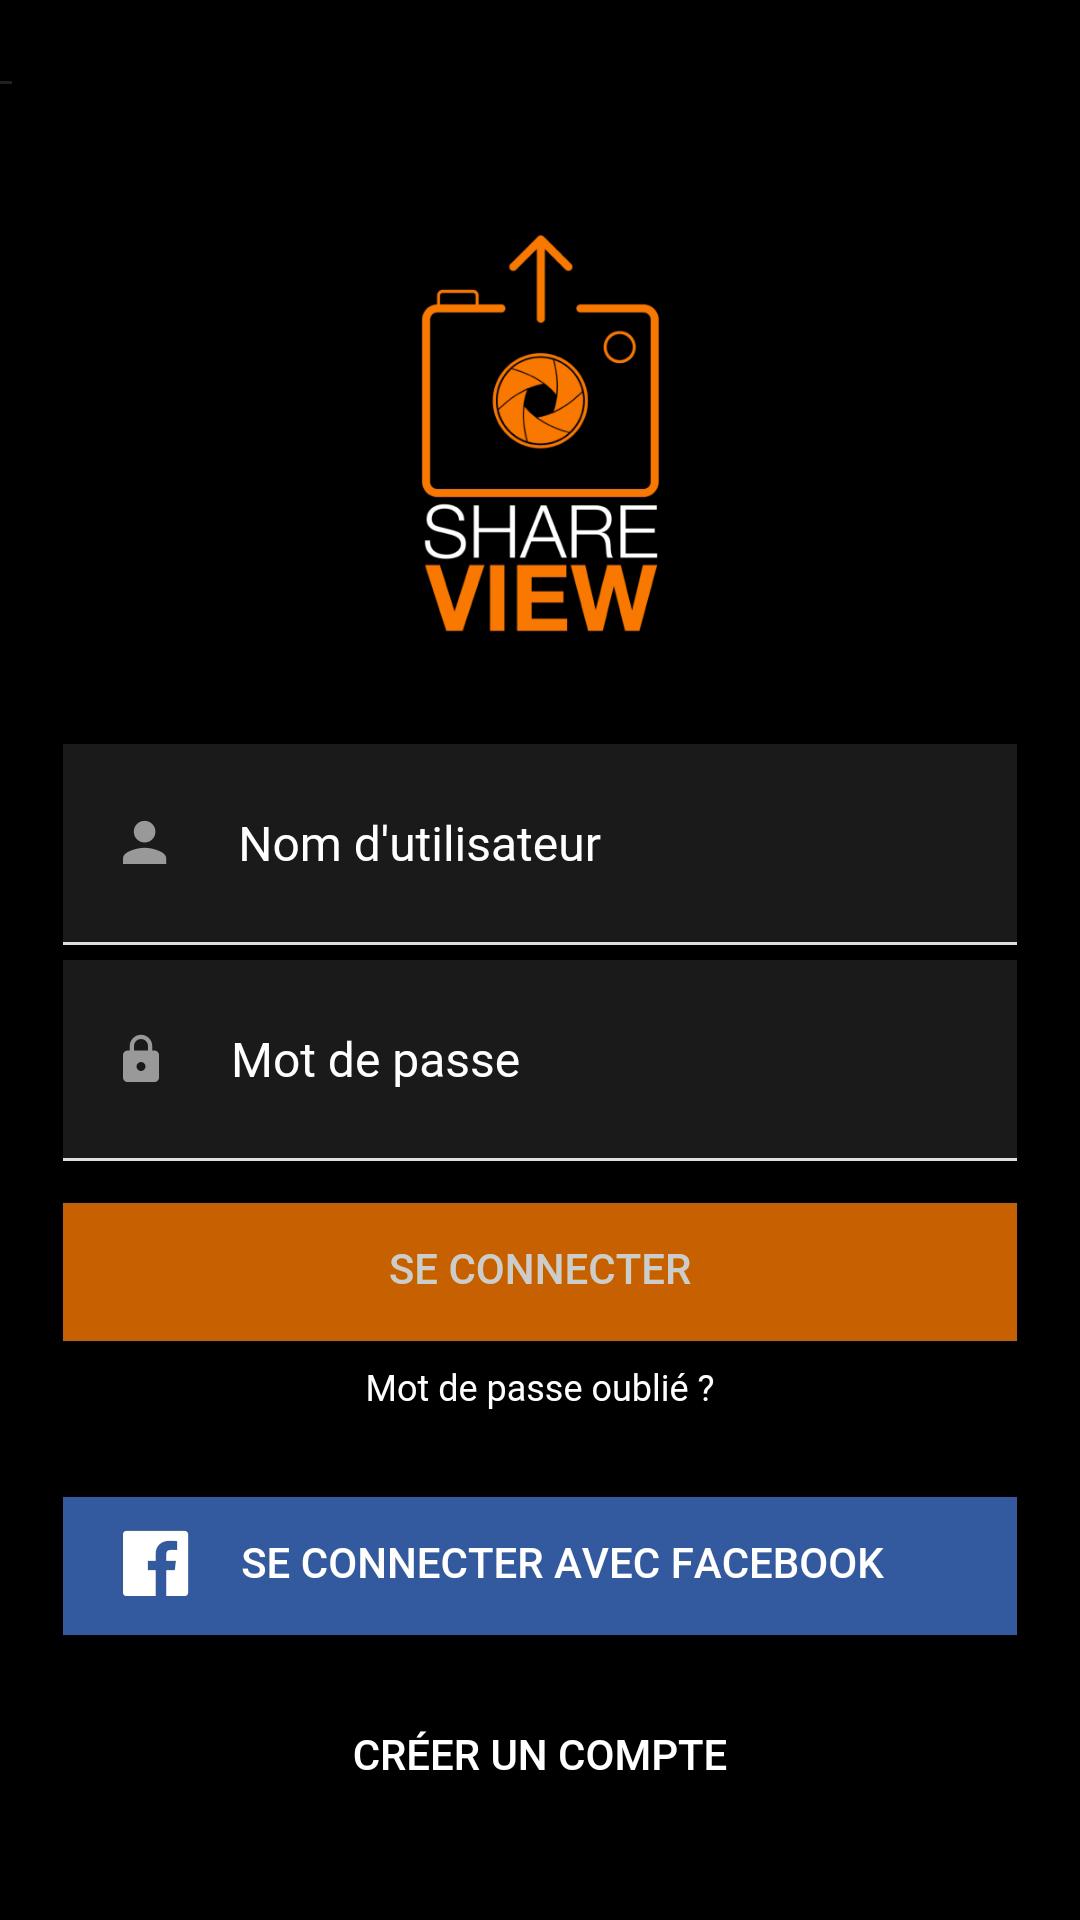 Shareview